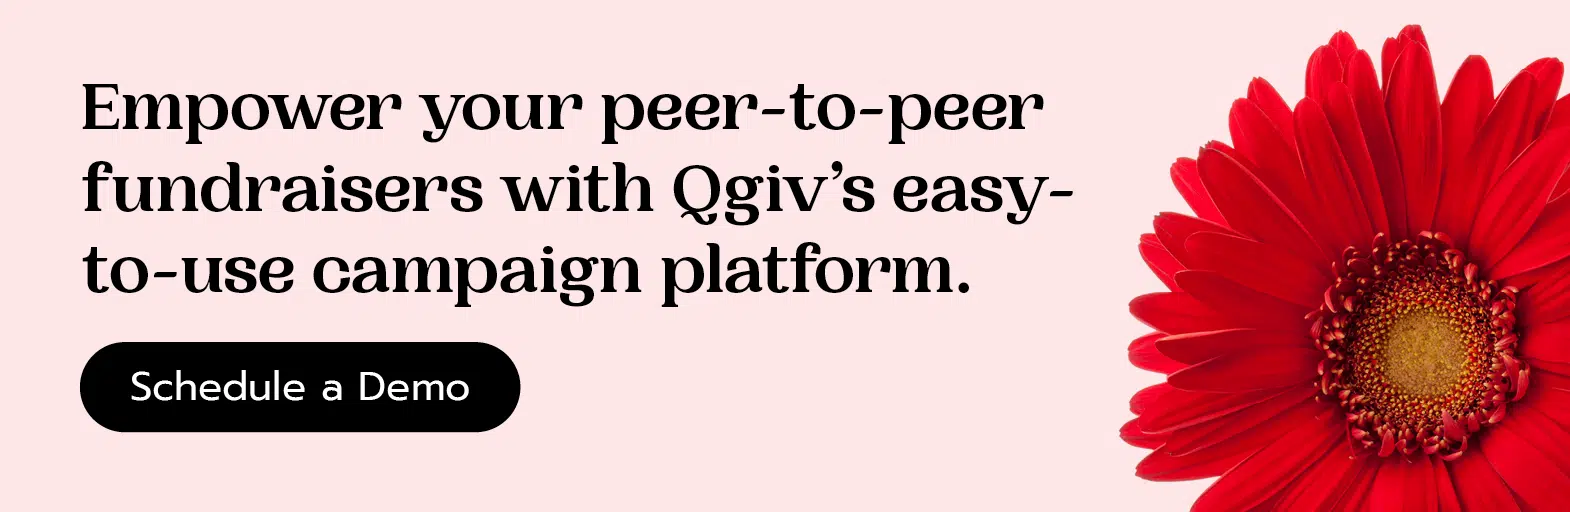 Empower your fundraisers with Qgiv's easy-to-use fundraising platform. Schedule a demo here. 